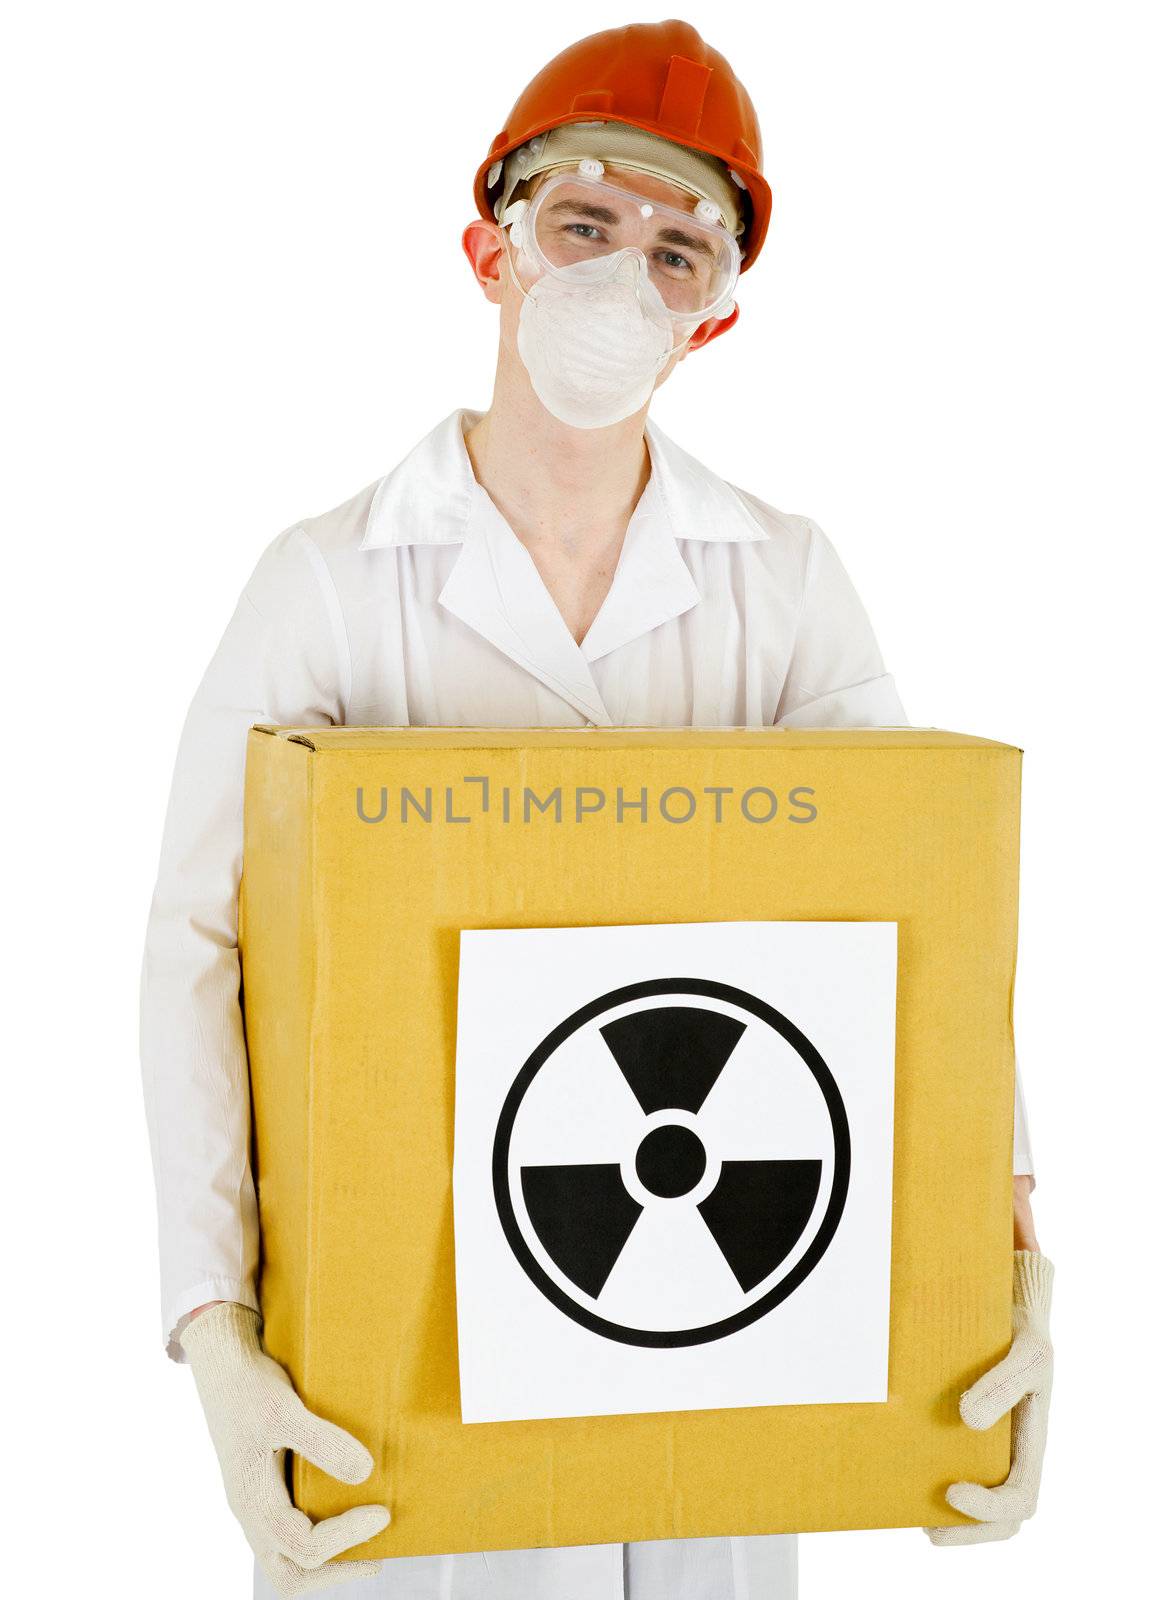 Scientist with a radioactive box by pzaxe